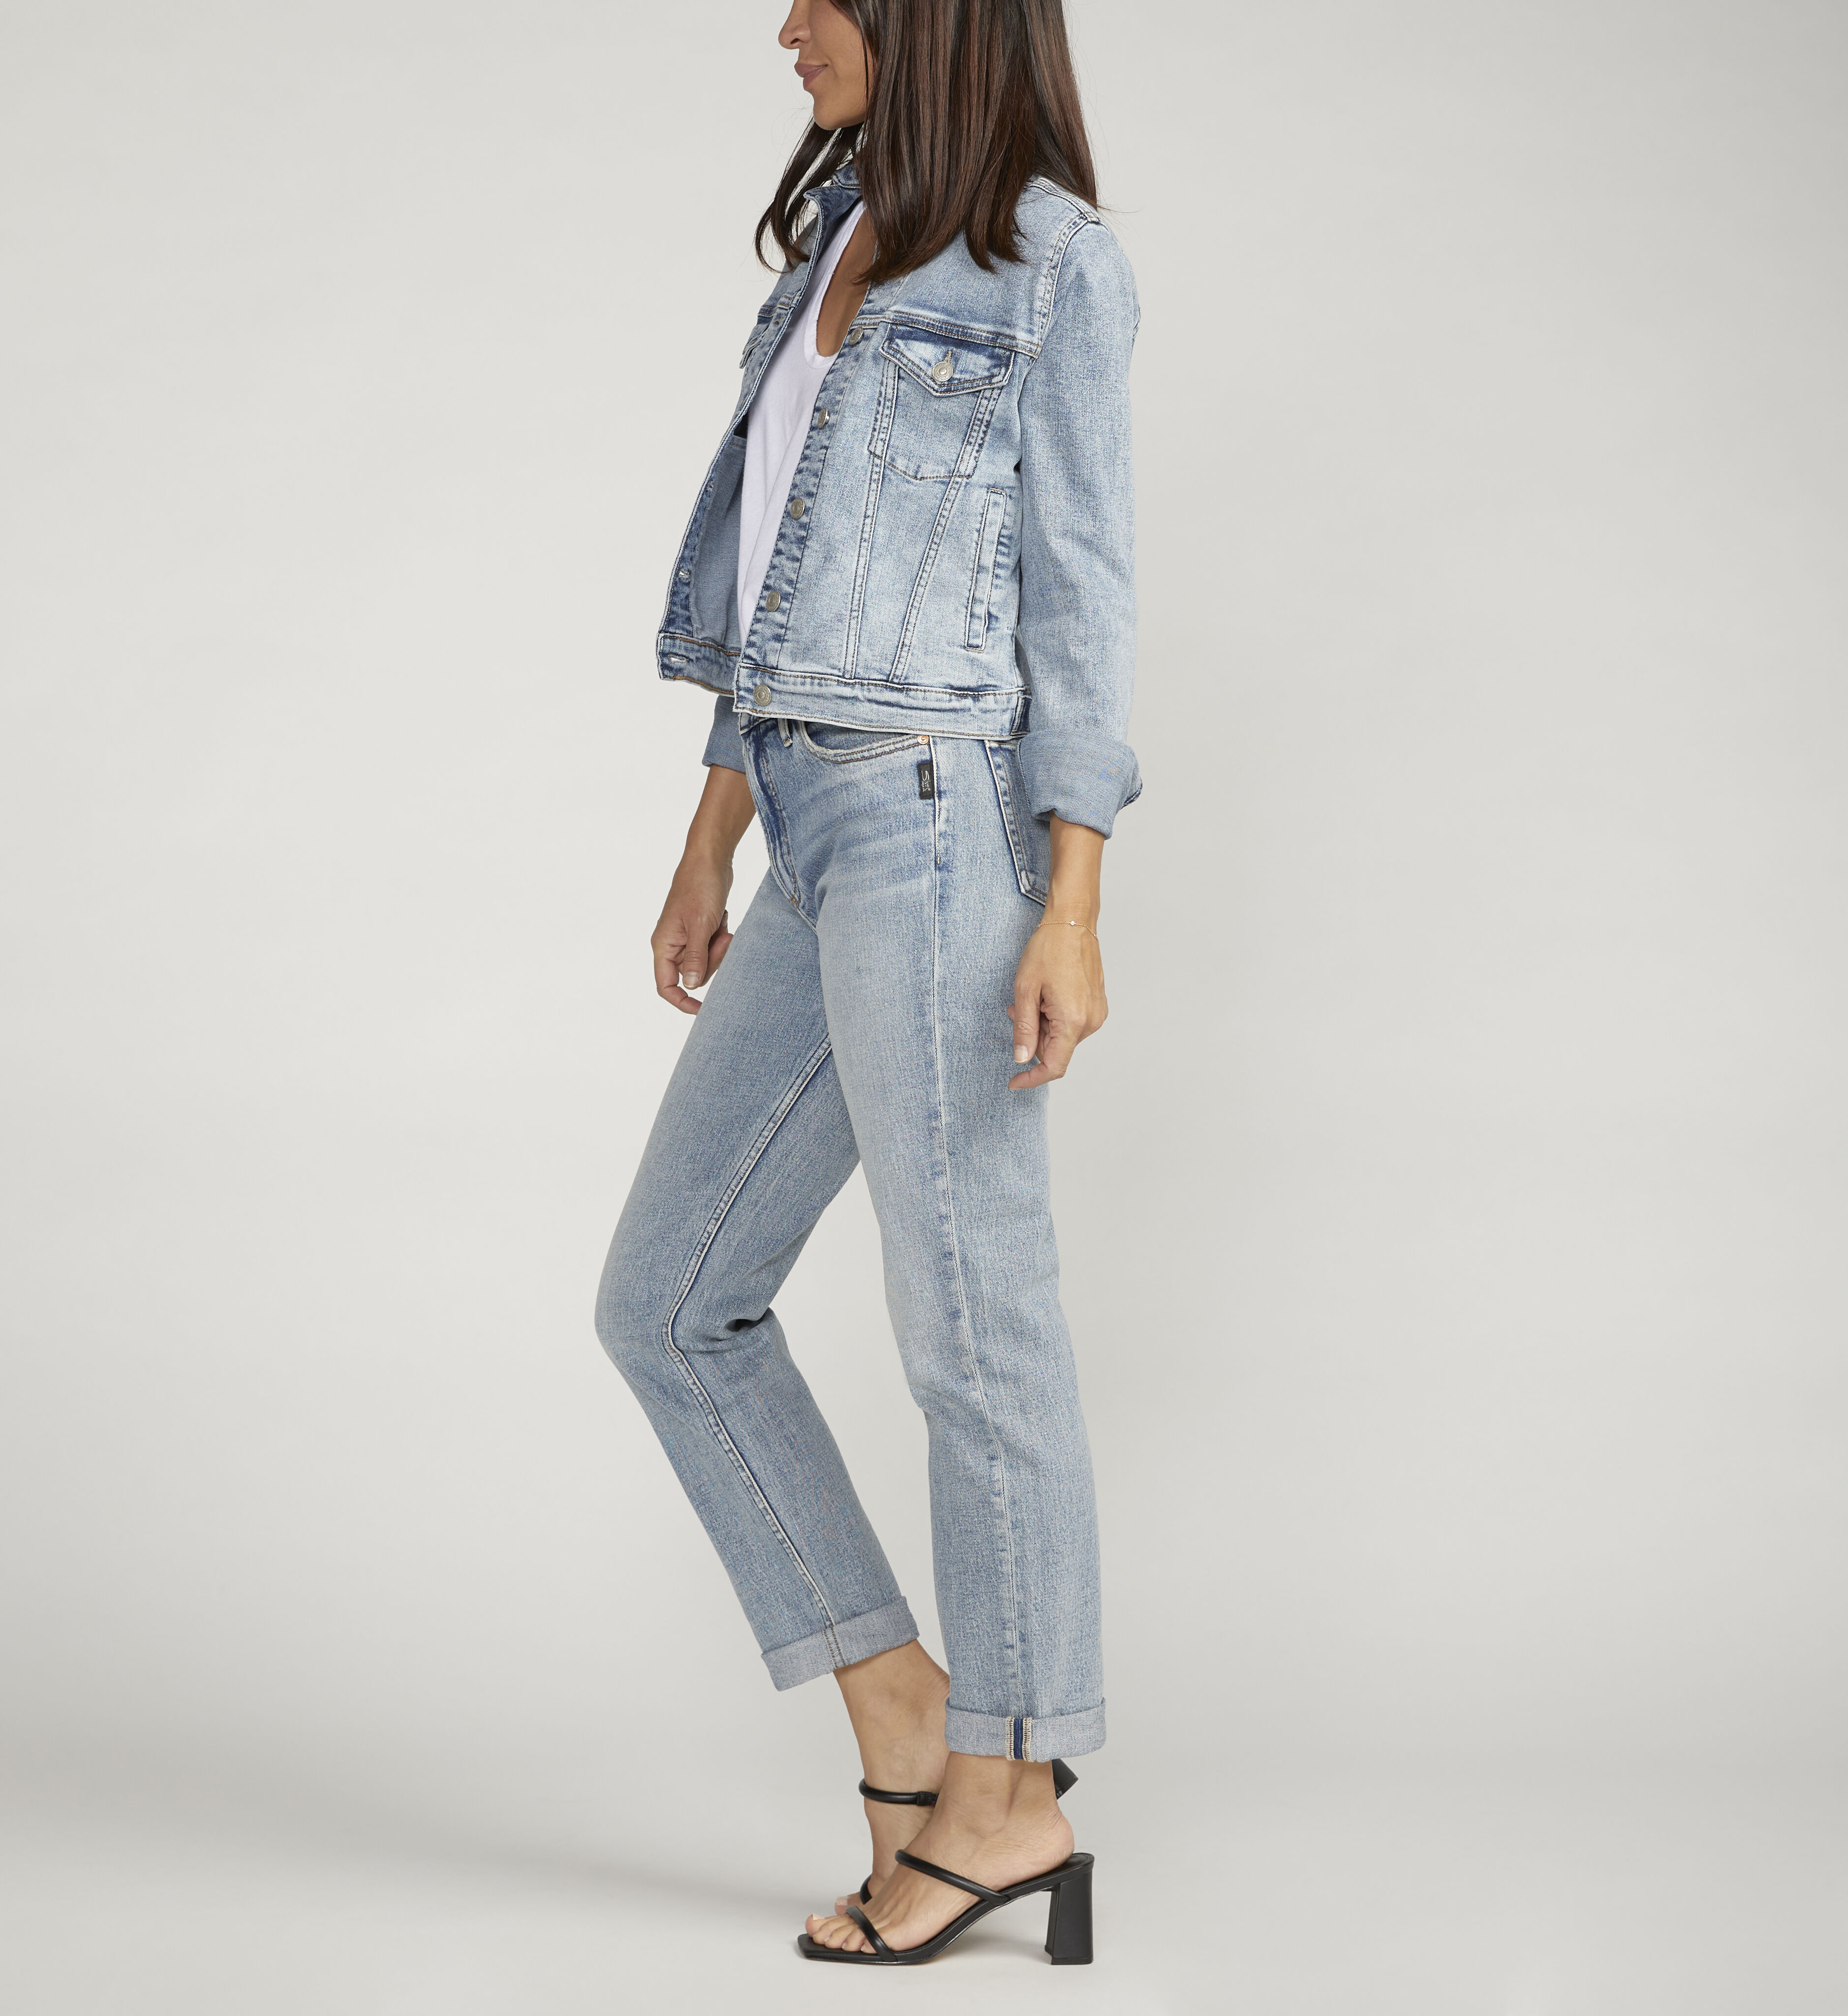 Buy Fitted Denim Jacket for USD 88.00 | Silver Jeans US New